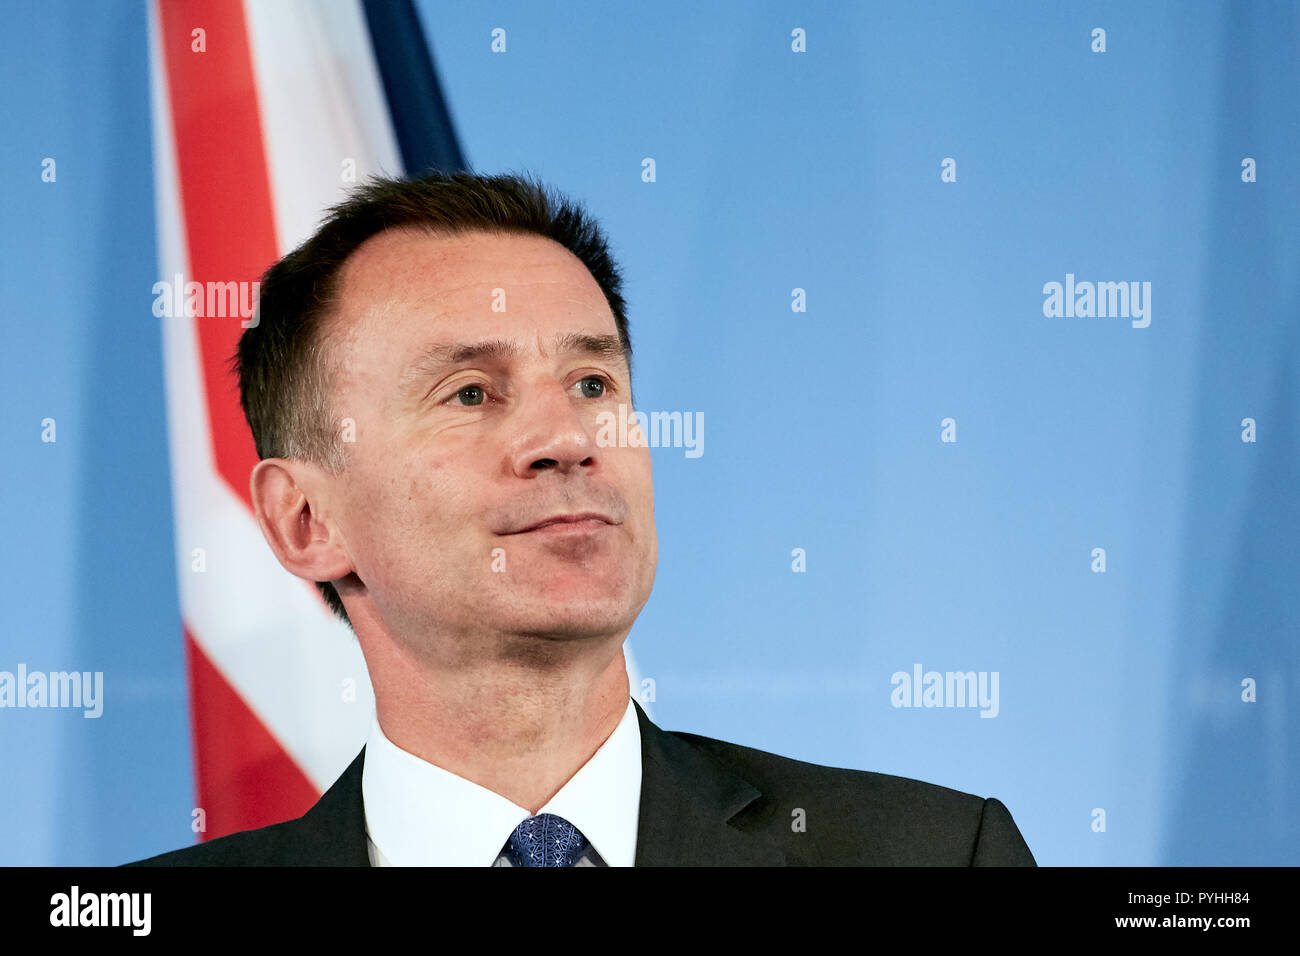 Berlin, Germany - British Foreign Minister Jeremy Hunt. Stock Photo